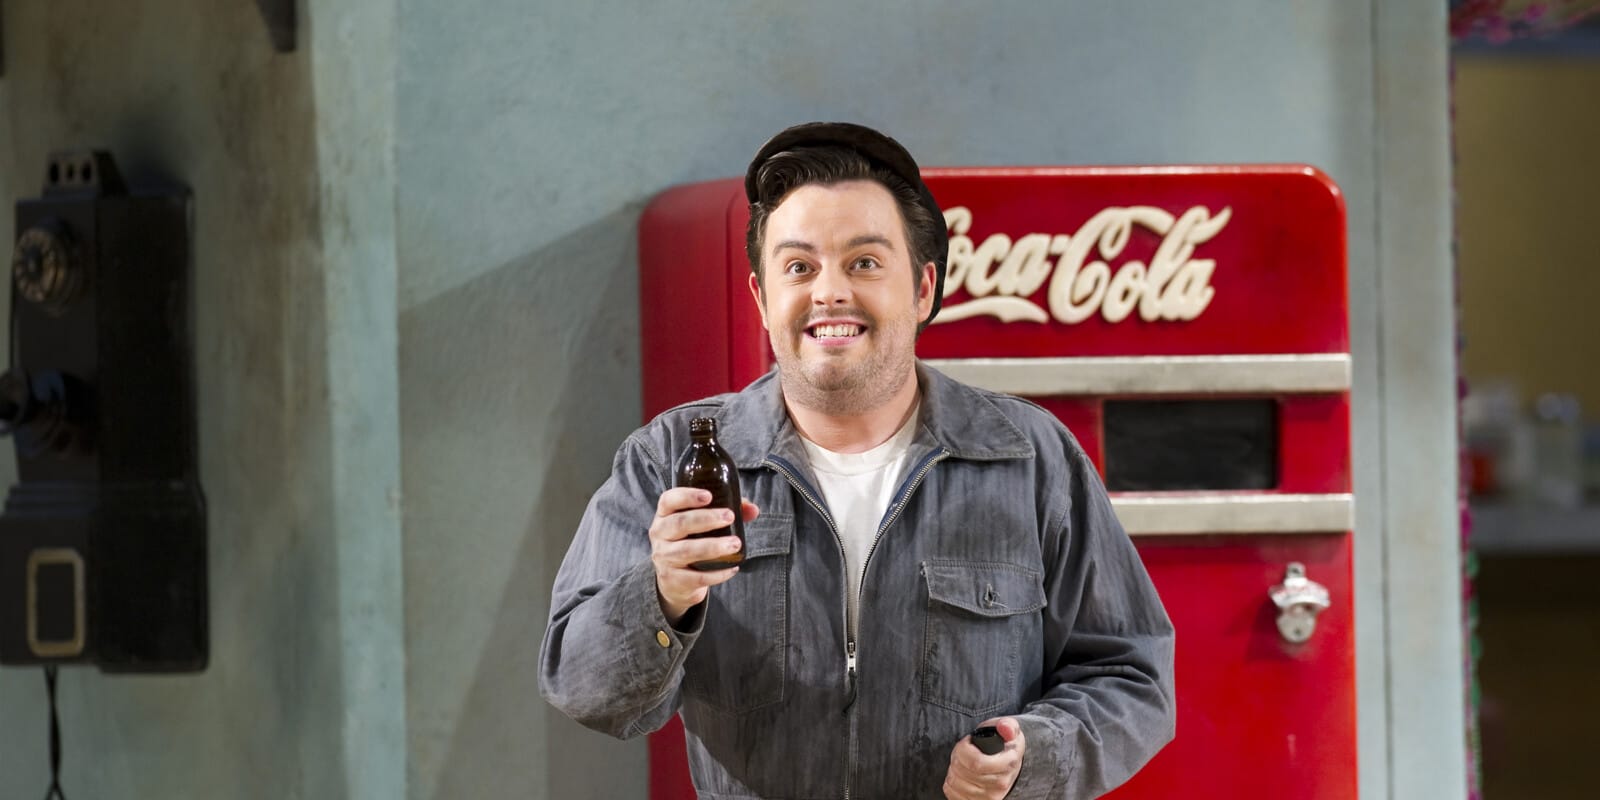 A man in a grey boiler suit stands next to a vending machine smiling.